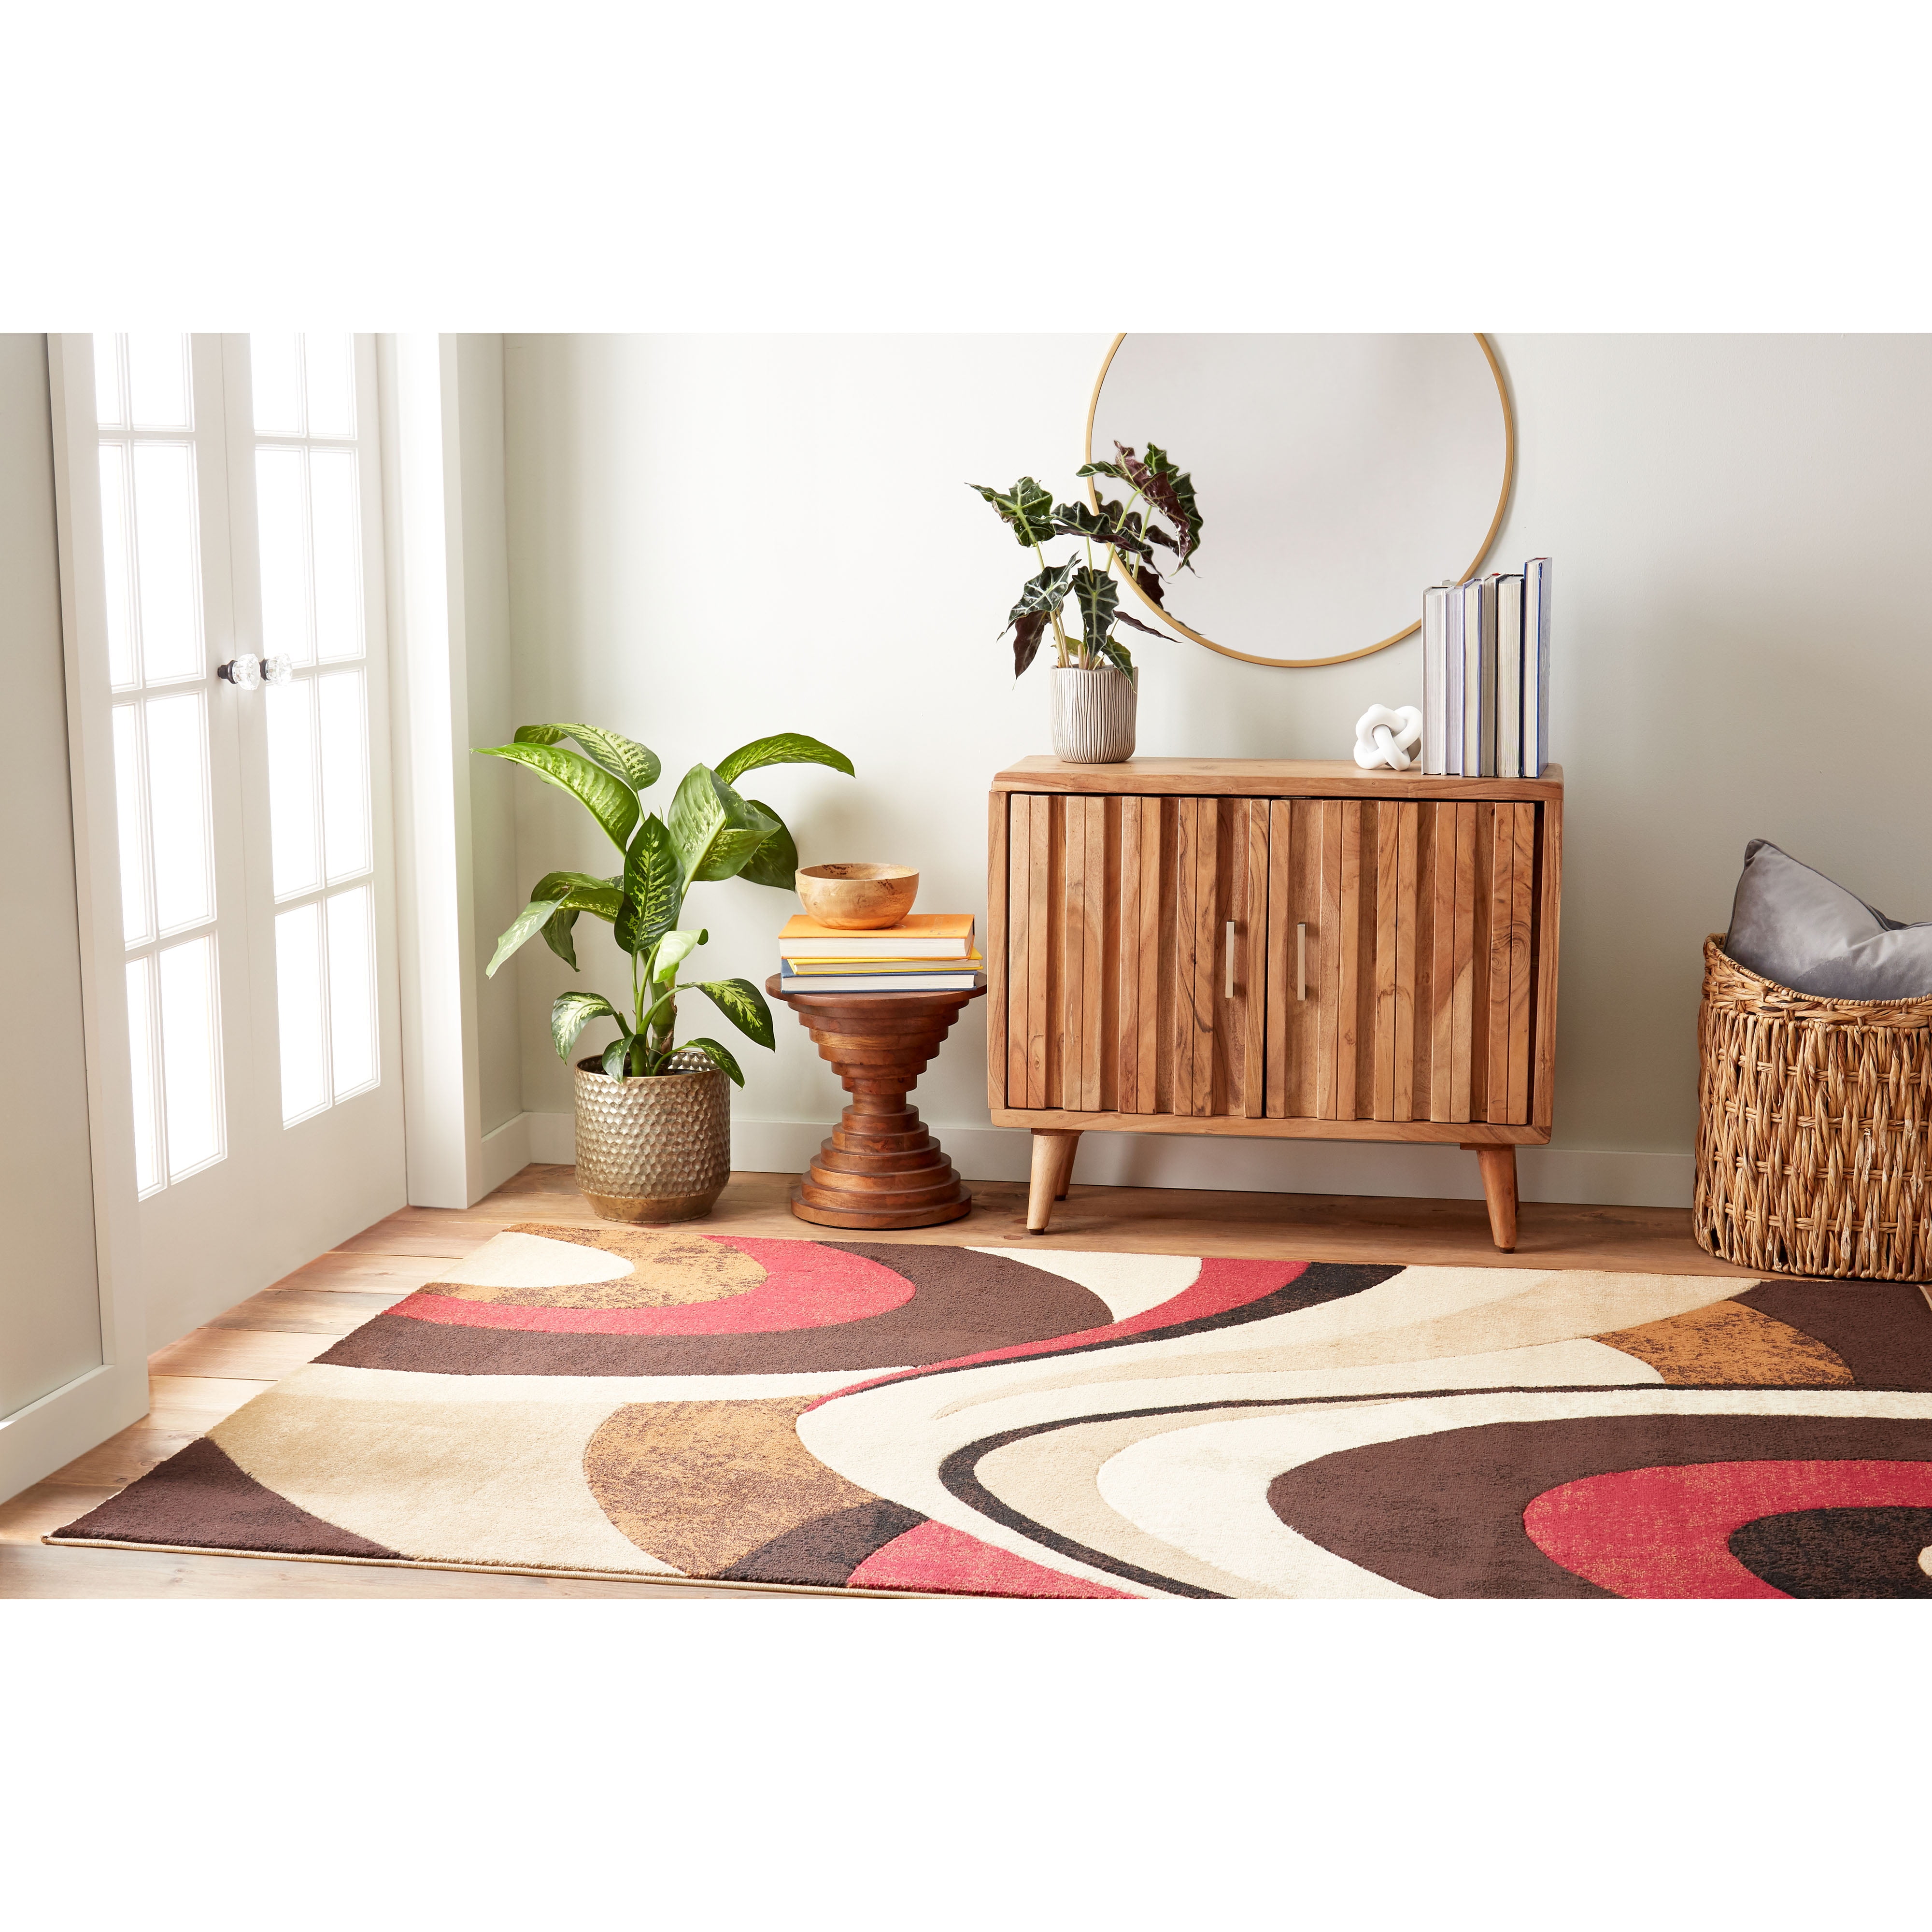 Home Dynamix Tribeca 5382-539 Brown Accent Rug - 1' 6 x 2' 7